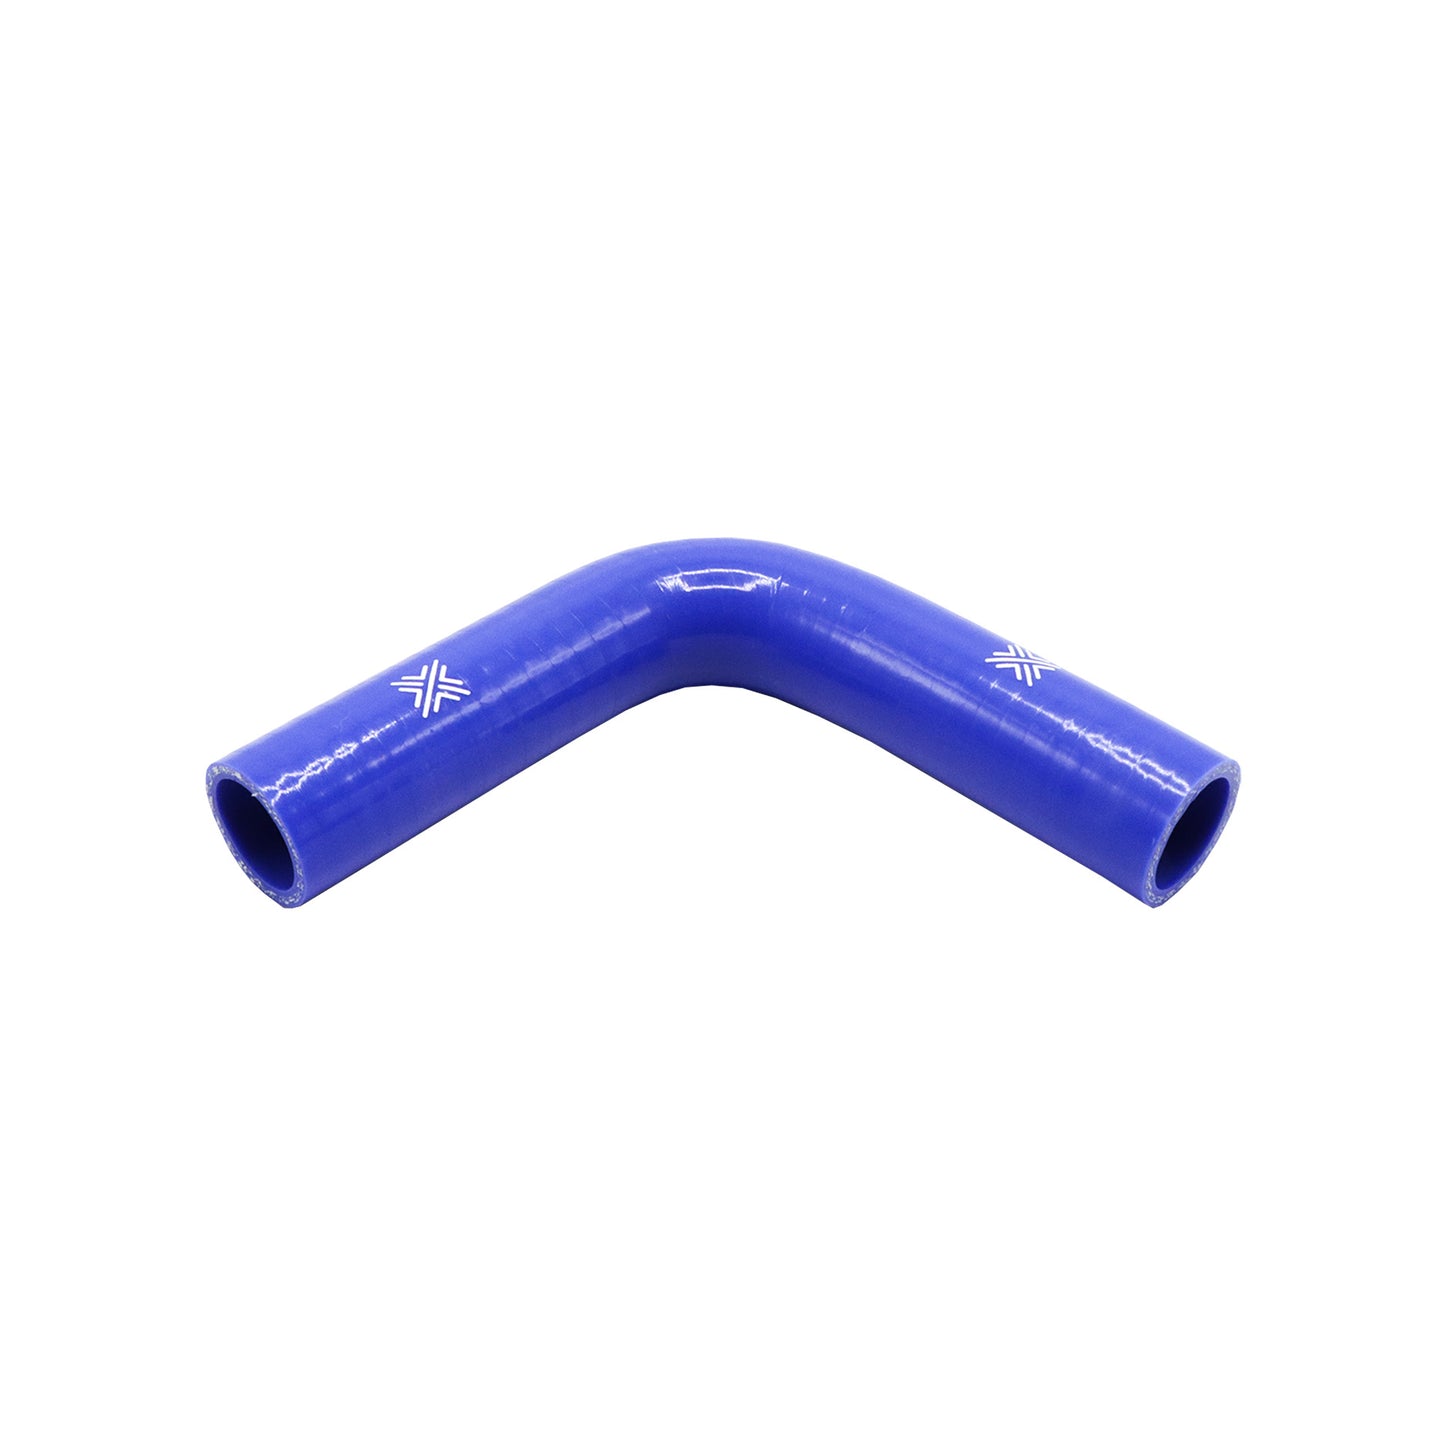 Pipercross Blue 90° 30mm Bore, 152mm Leg Length Silicone Hose (FCL04067)